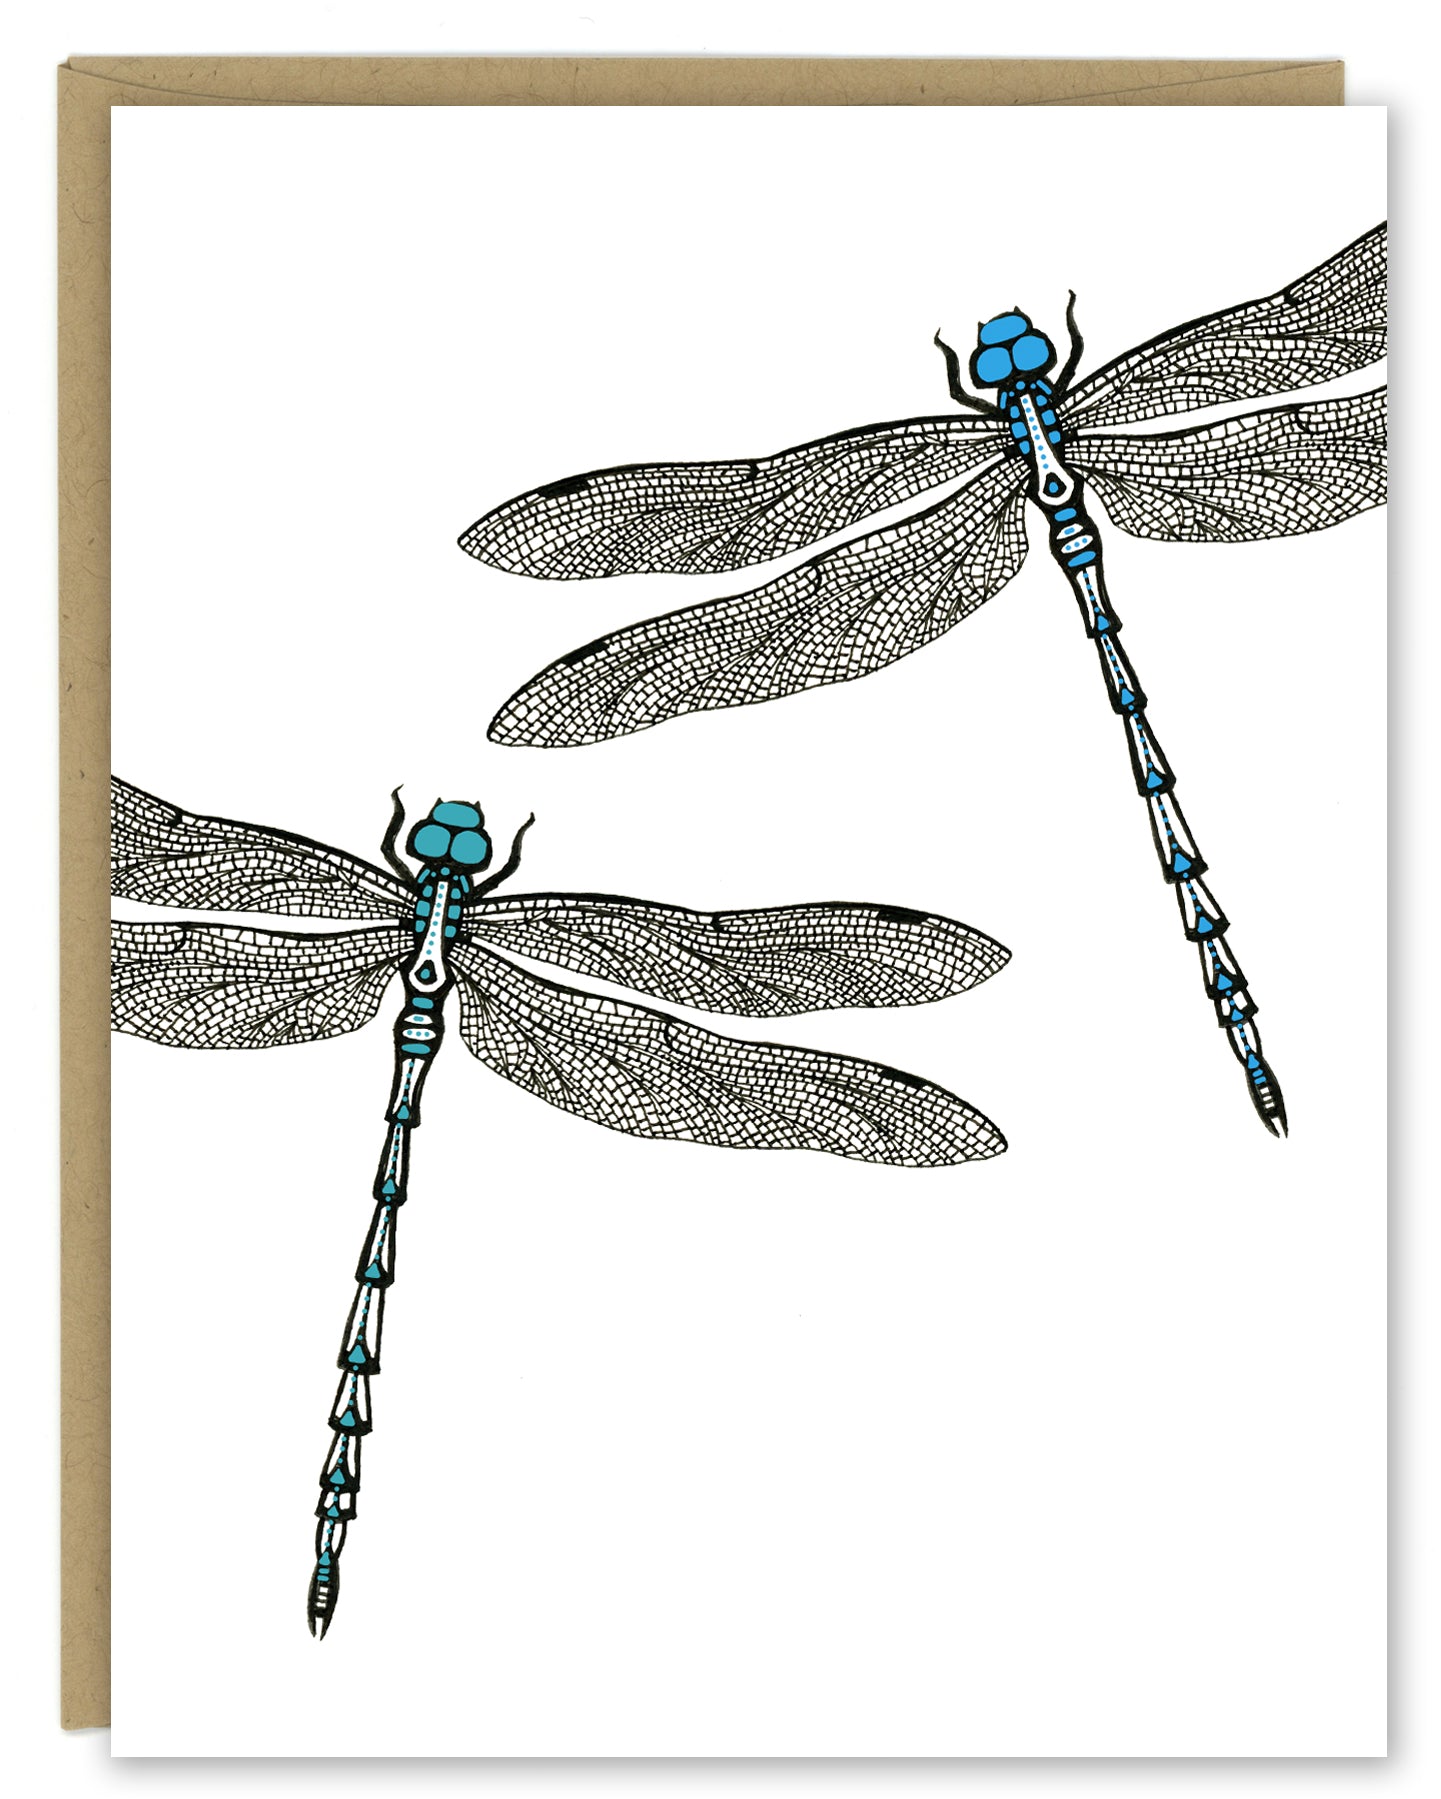 A greeting card showing a hand-drawn ink illustration of two dragonflies, one with blue highlights and one with teal accents. Shown with a Kraft paper envelope on a white background. 